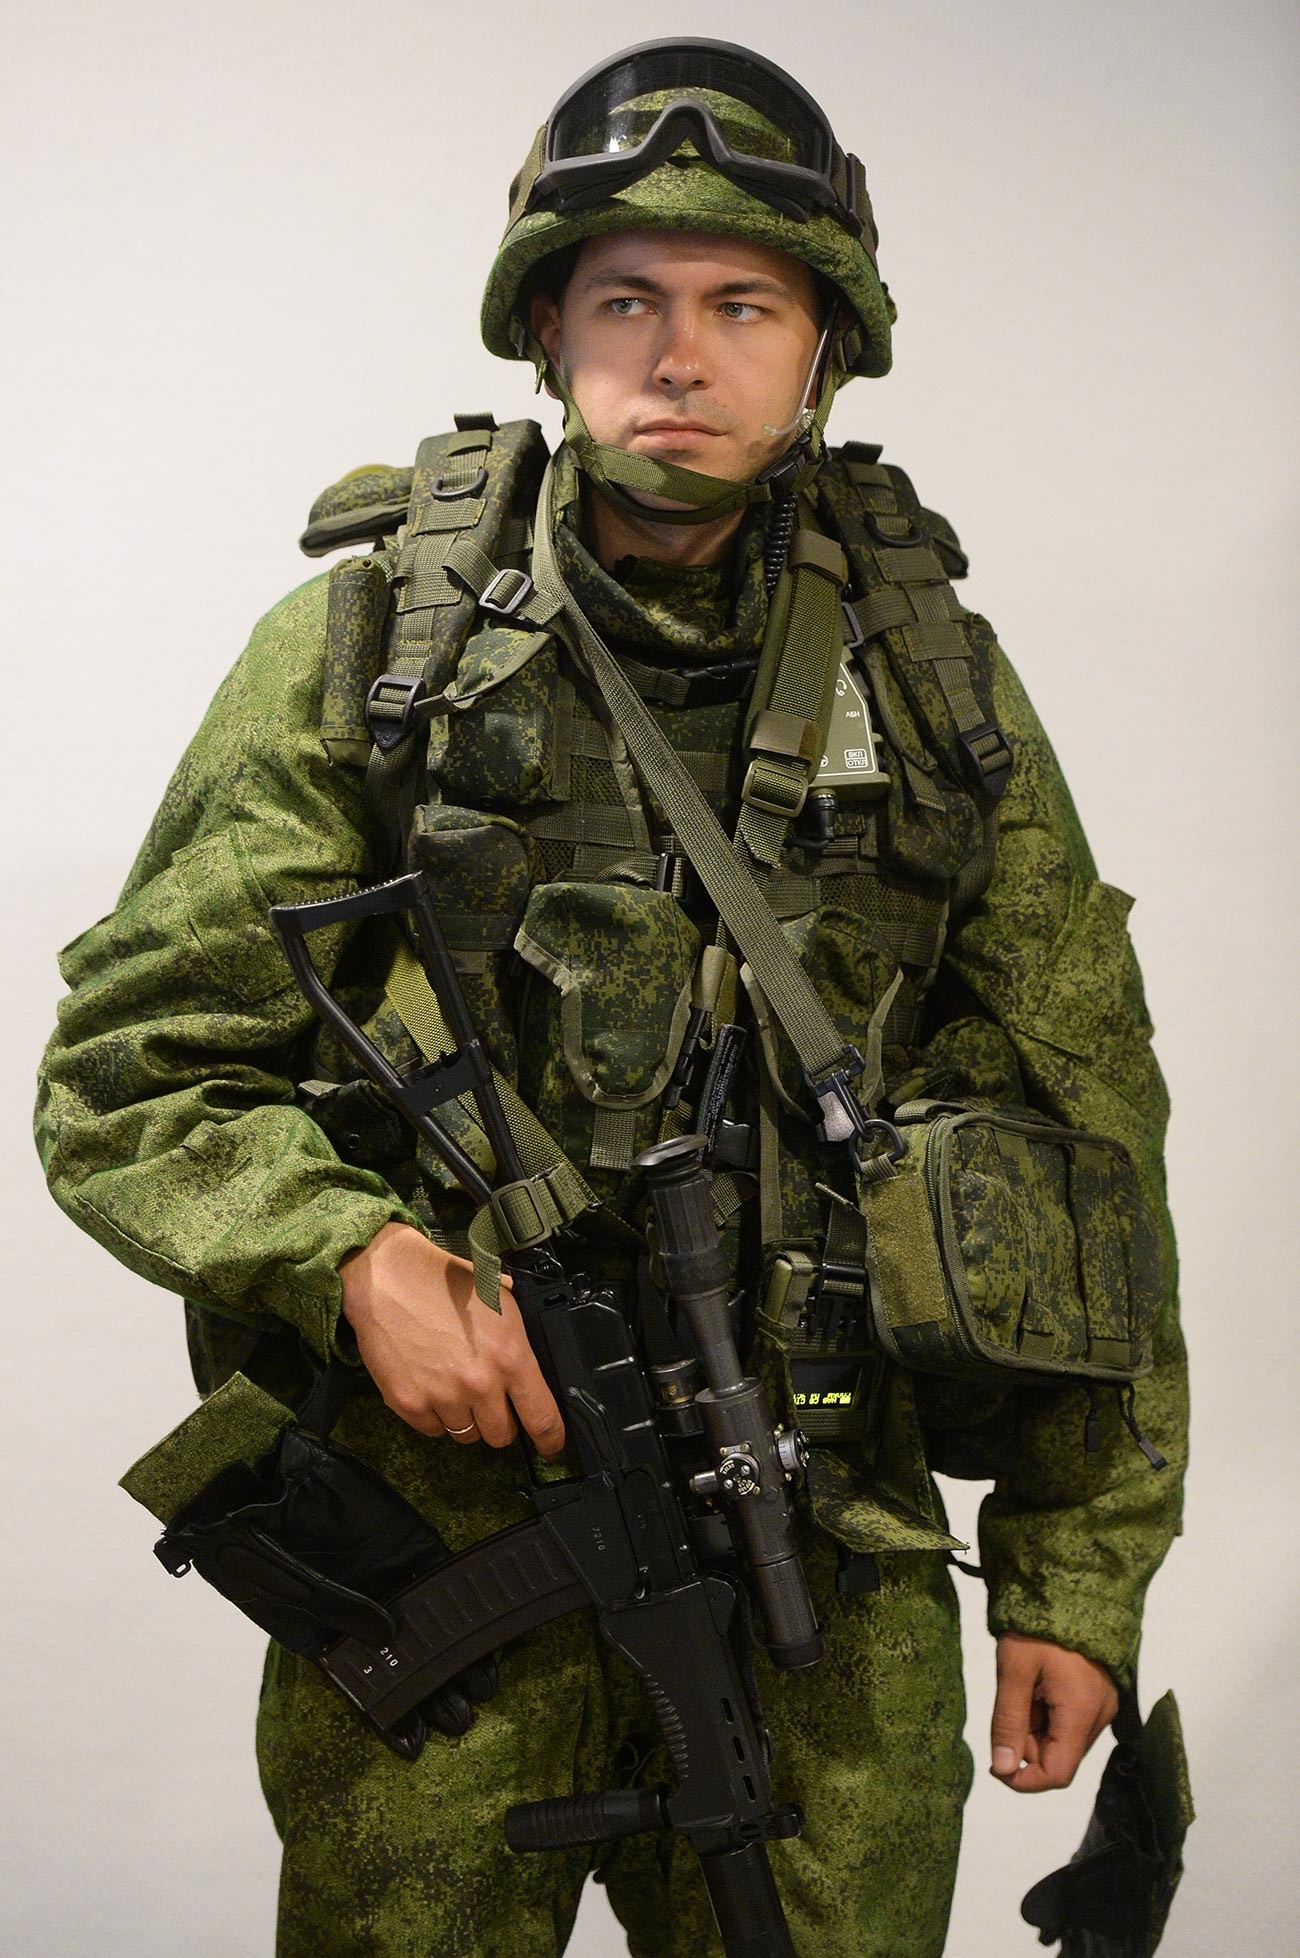 Overview Of The 2020 Russian Military Kit - Russia Beyond